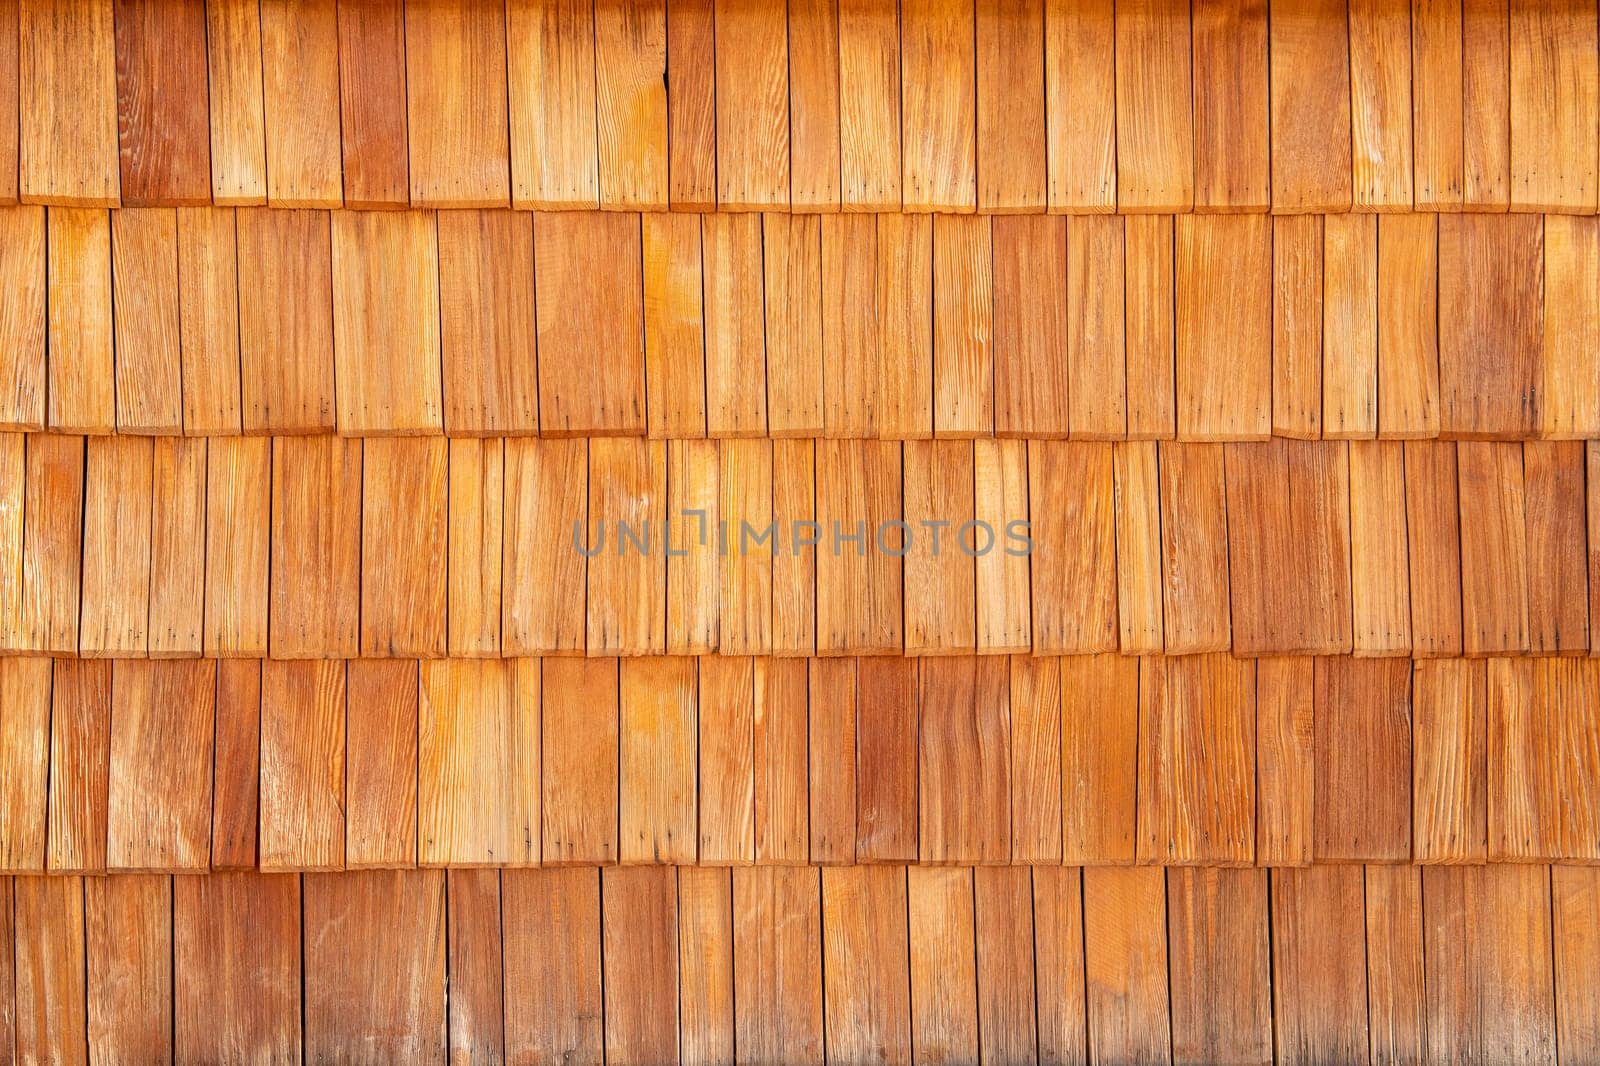 Wooden shingle roof tile background, rural construction.